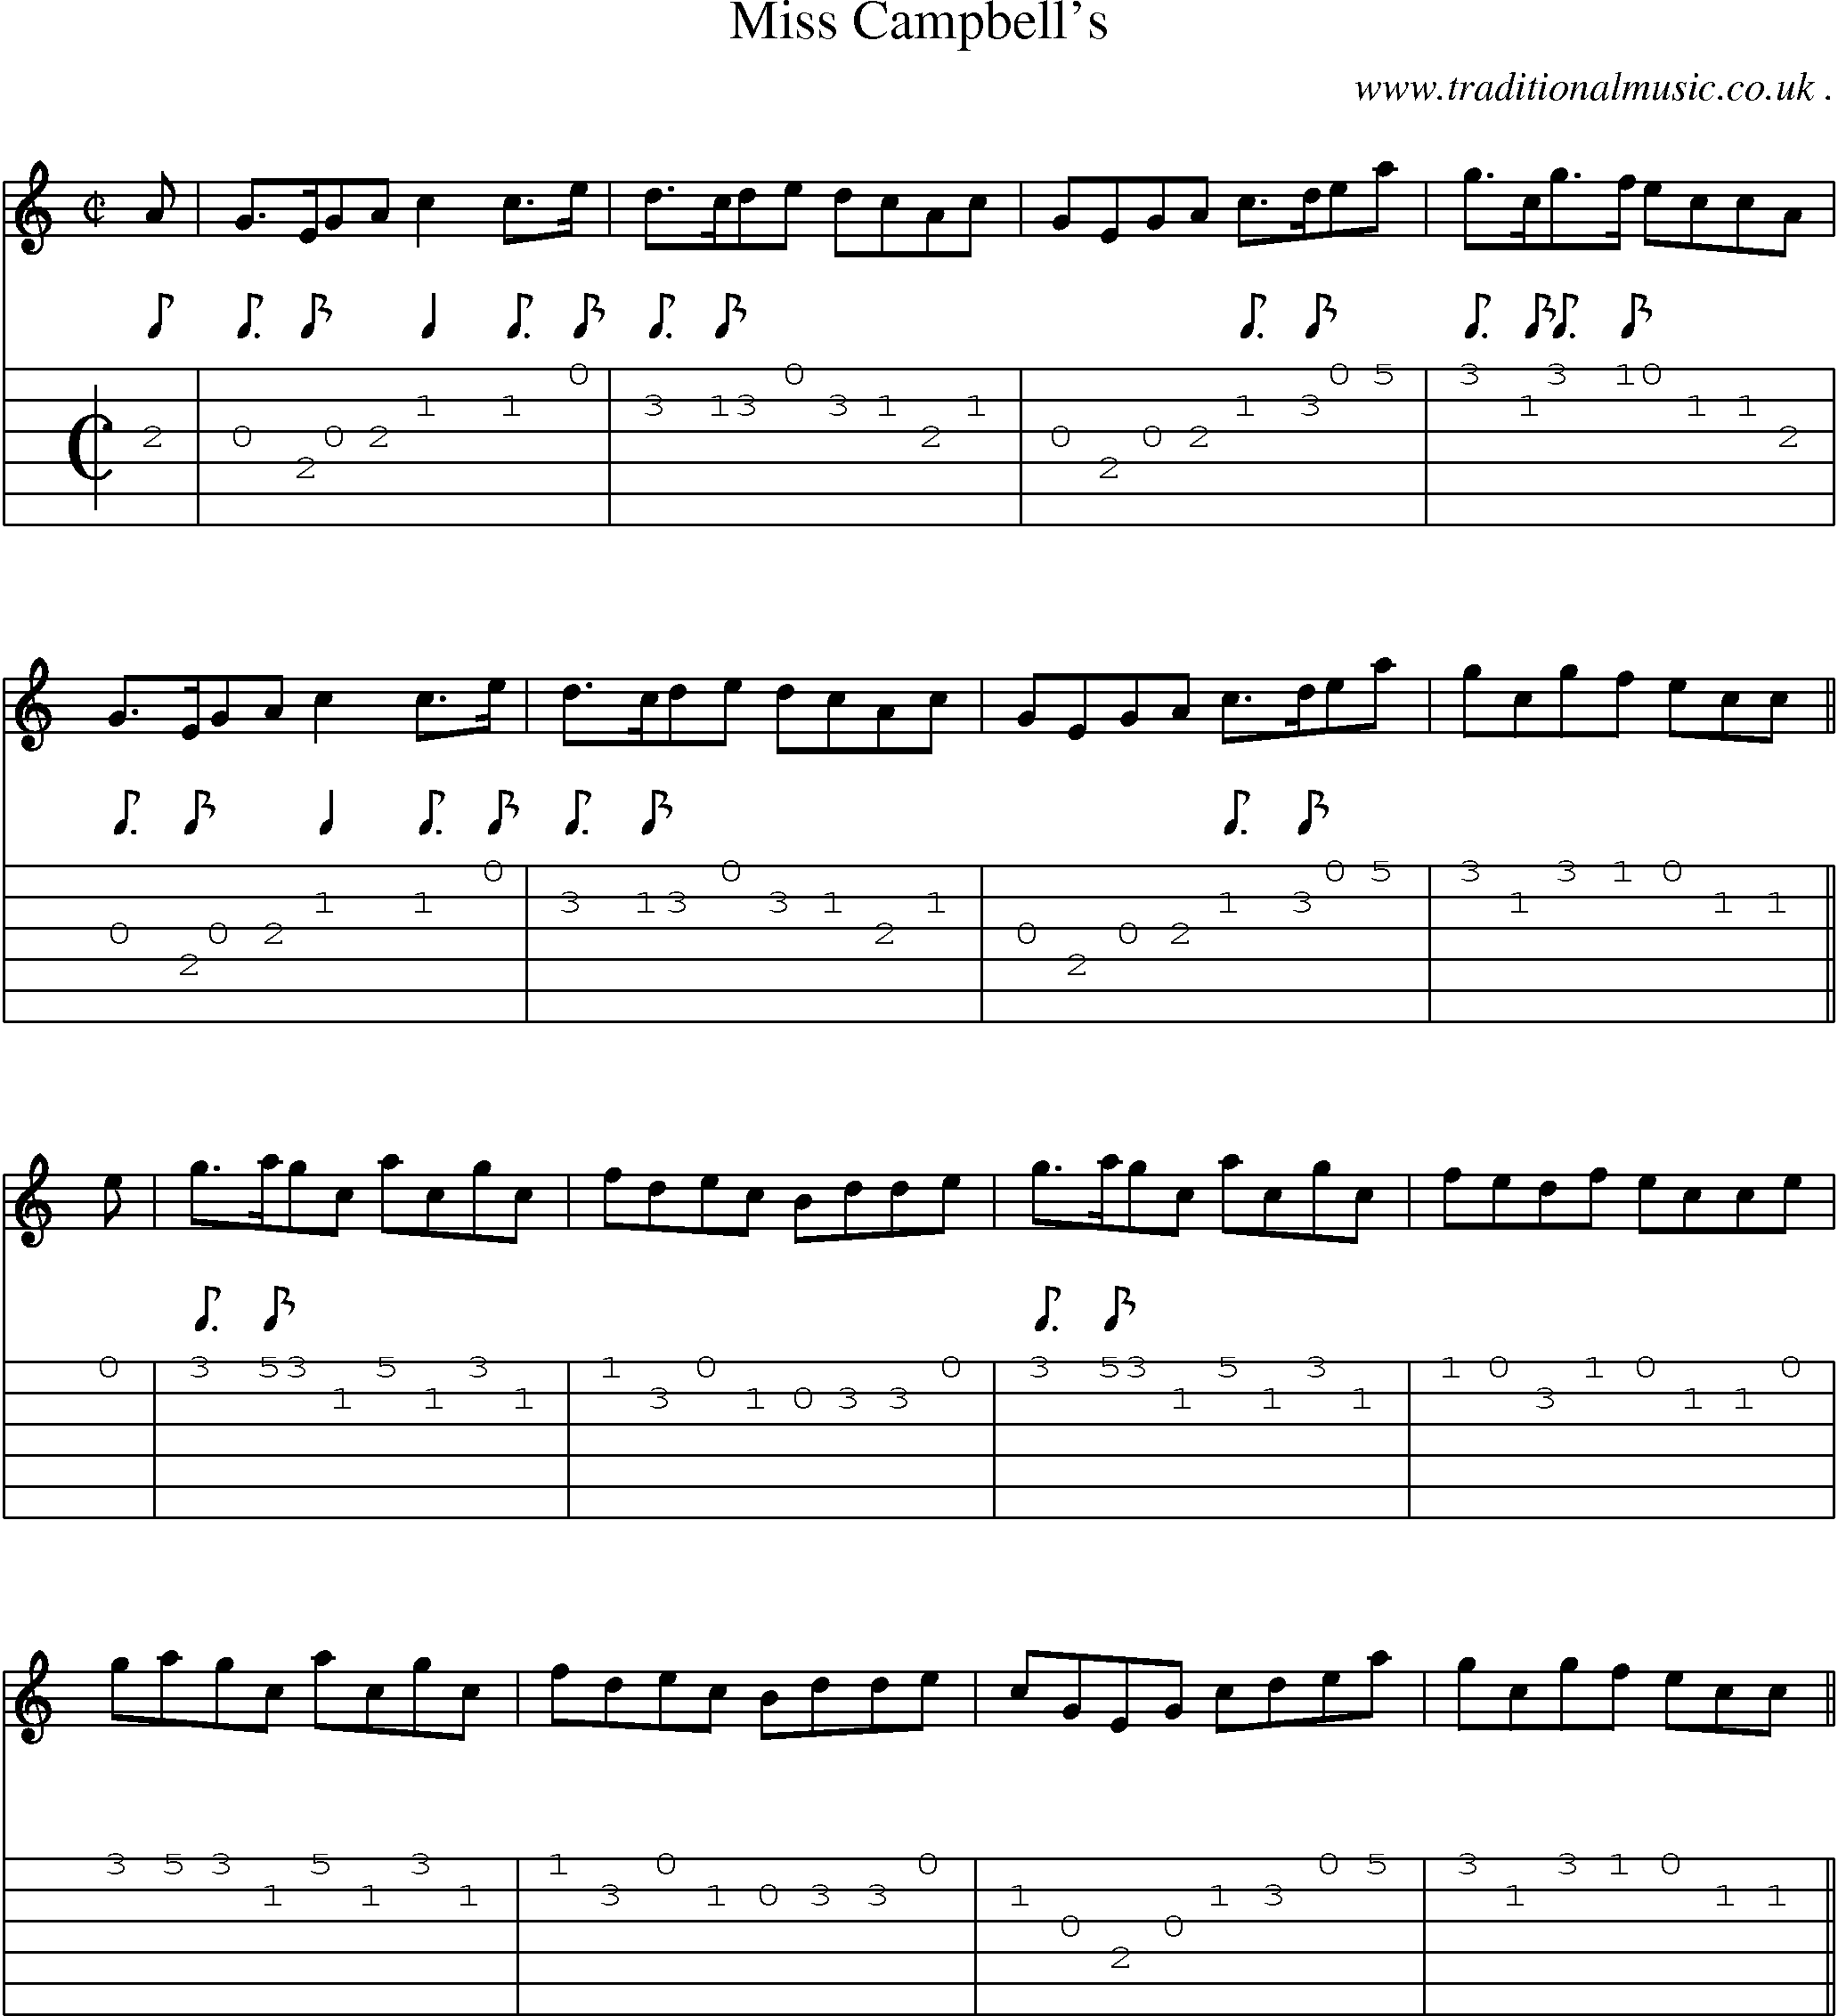 Sheet-Music and Guitar Tabs for Miss Campbells